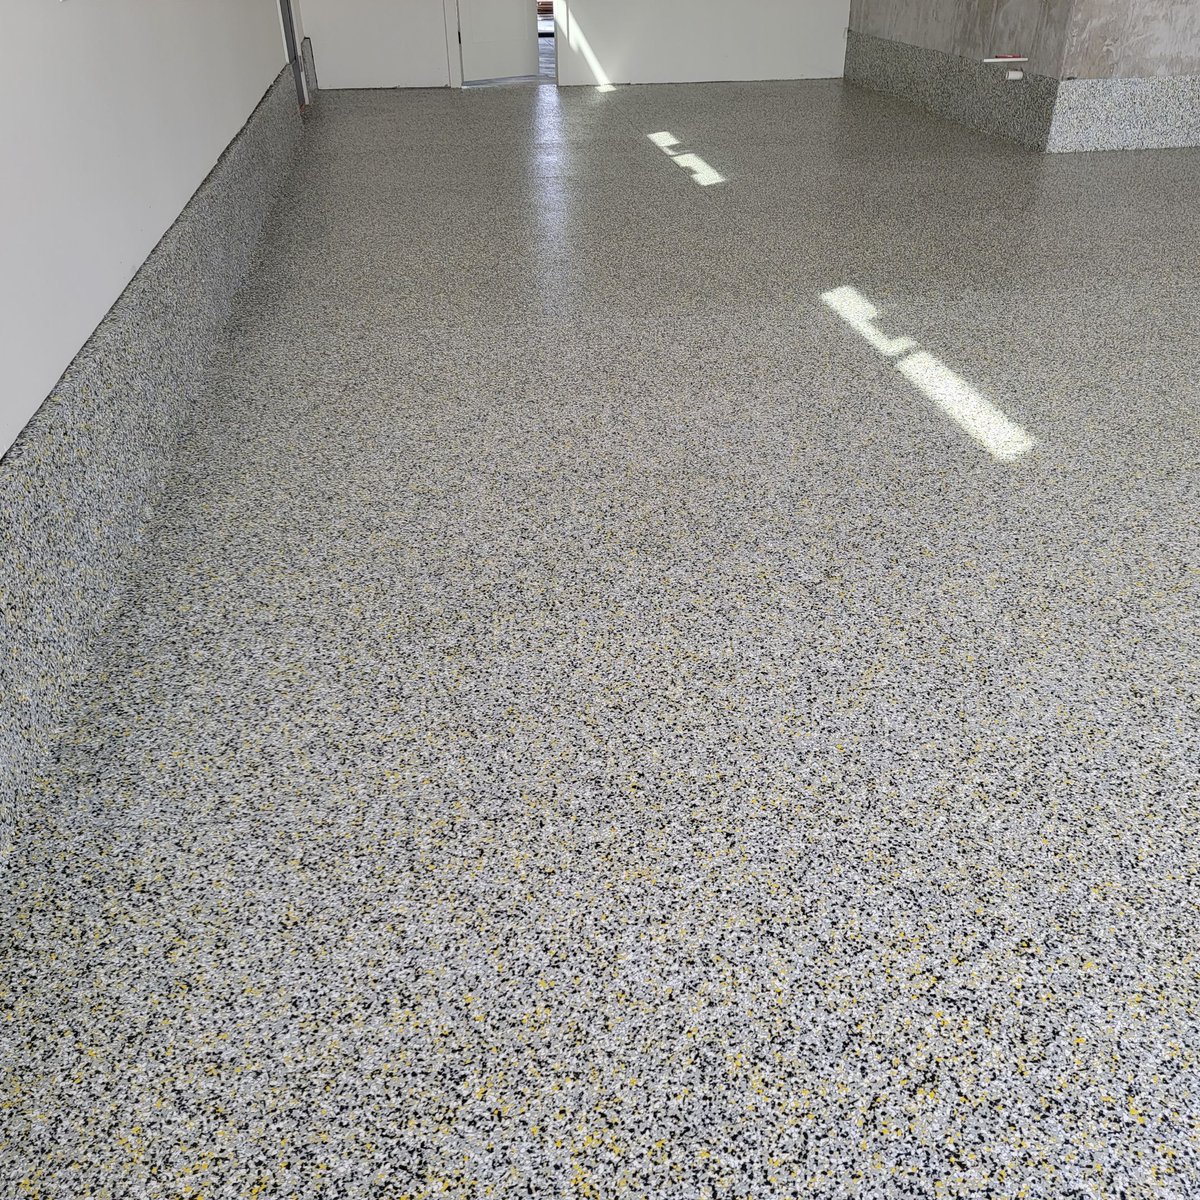 Upgrade your garage floor and protect it from oil spills and tire marks with Solid Custom Floor Coatings. Our high-quality coatings are oil and grime resistant, making cleanup a breeze. 

Contact us: utahgaragefloorcoatings.com 

#CleanGarageFloor #StainResistant